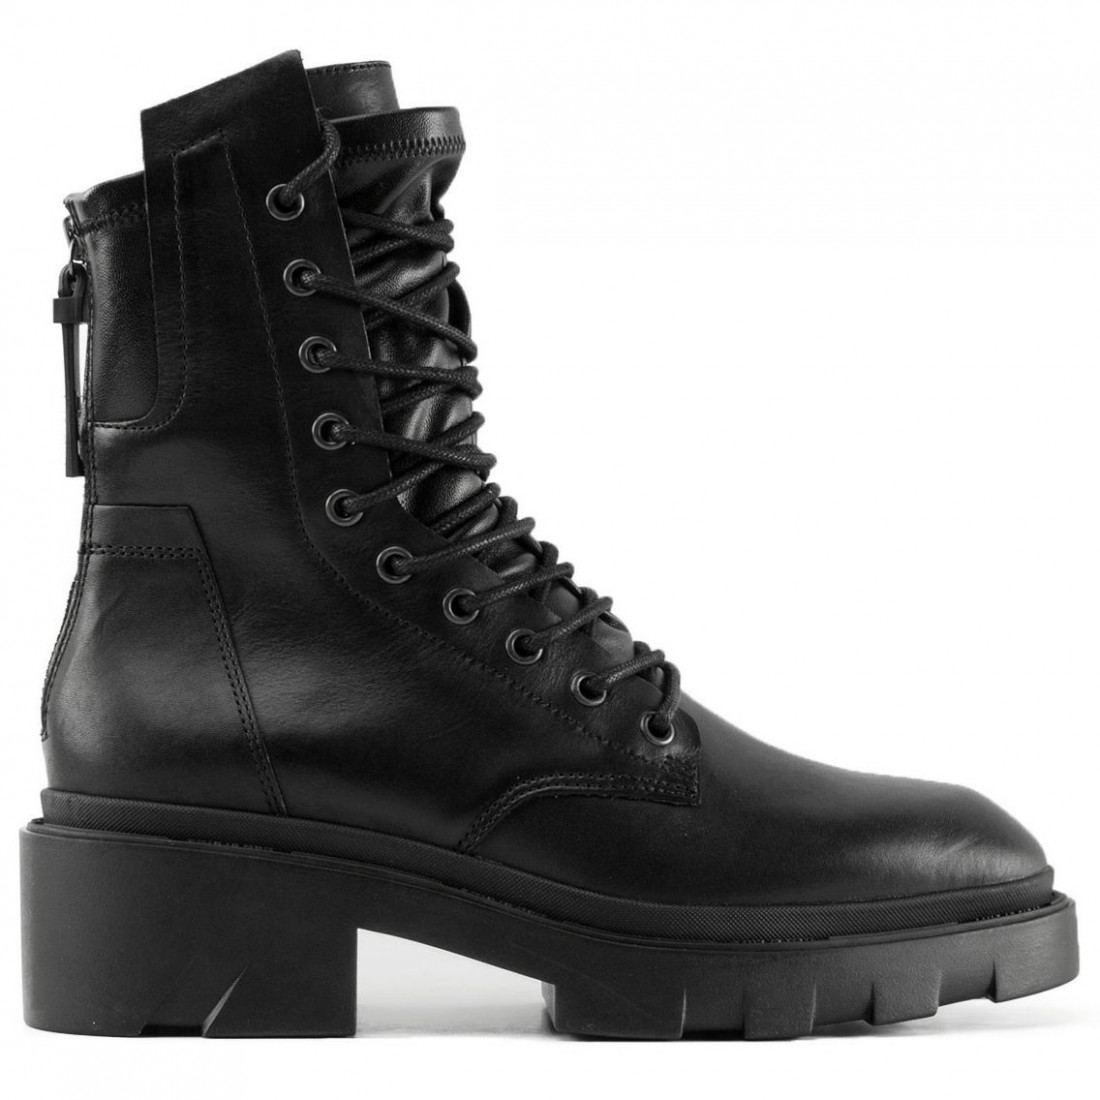 Women's Ash Madness biker boots in black leather